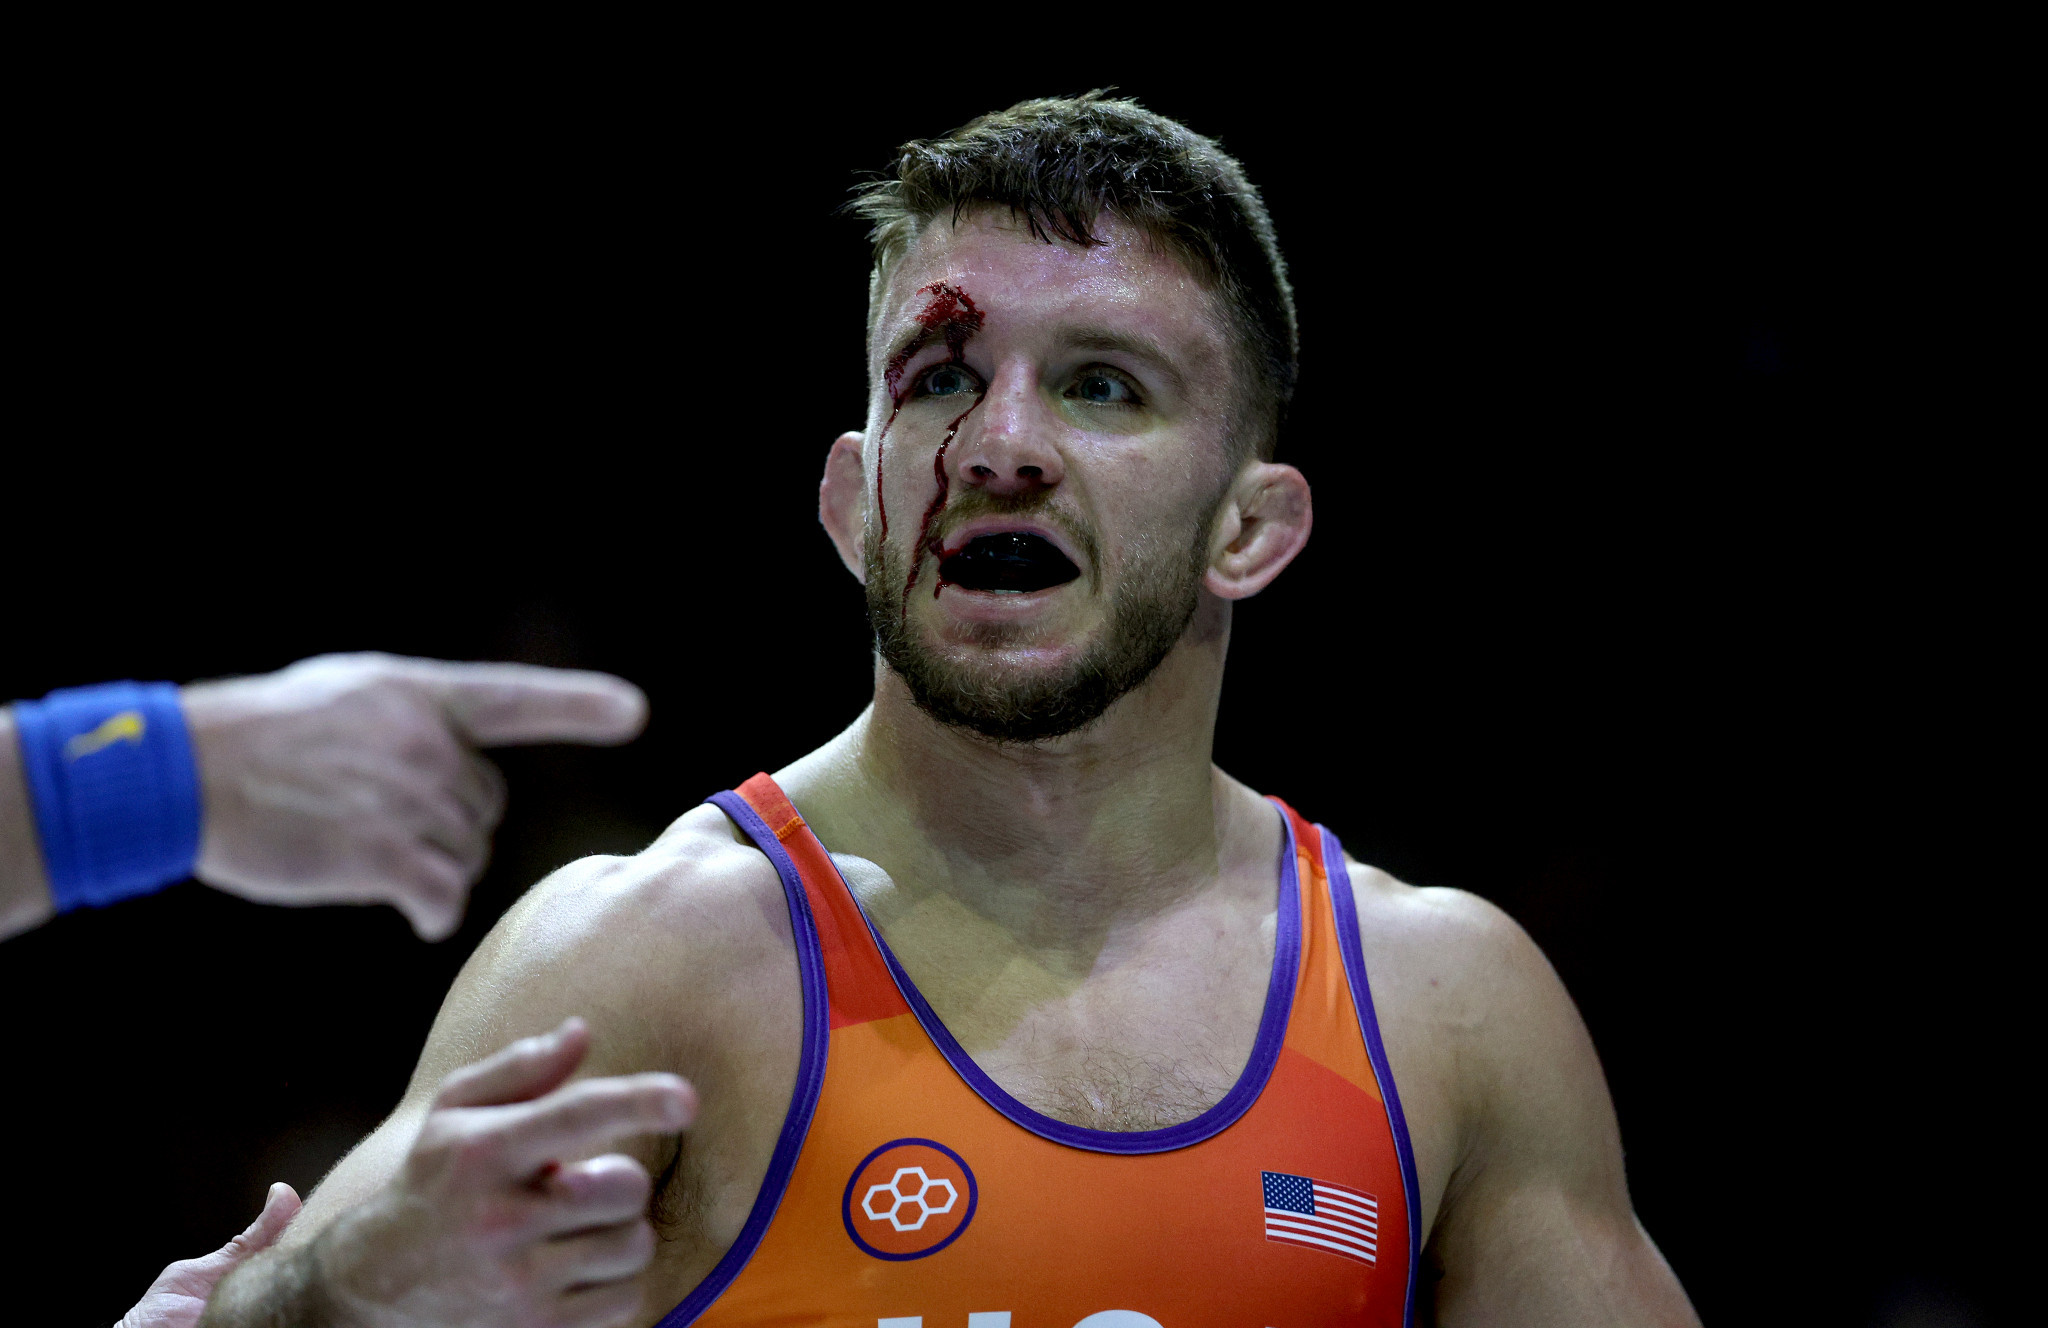 Zain Retherford was one of three American champions crowned today in Belgrade ©Getty Images